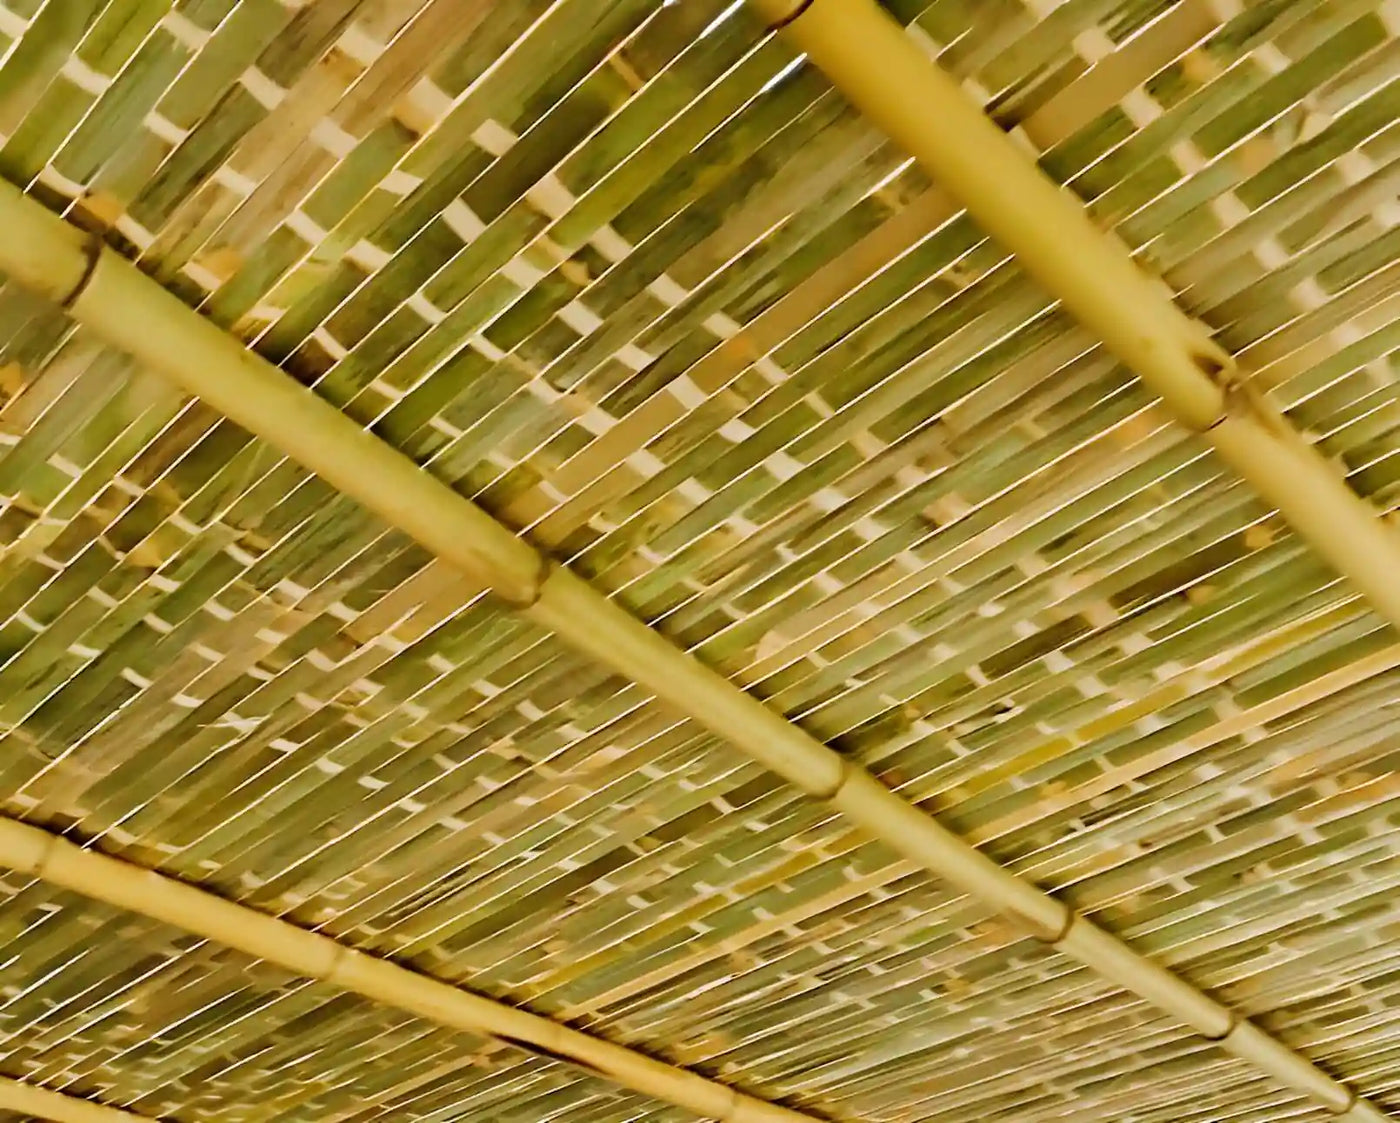 schach for sukkah on sukkah roof supported by bamboo poles